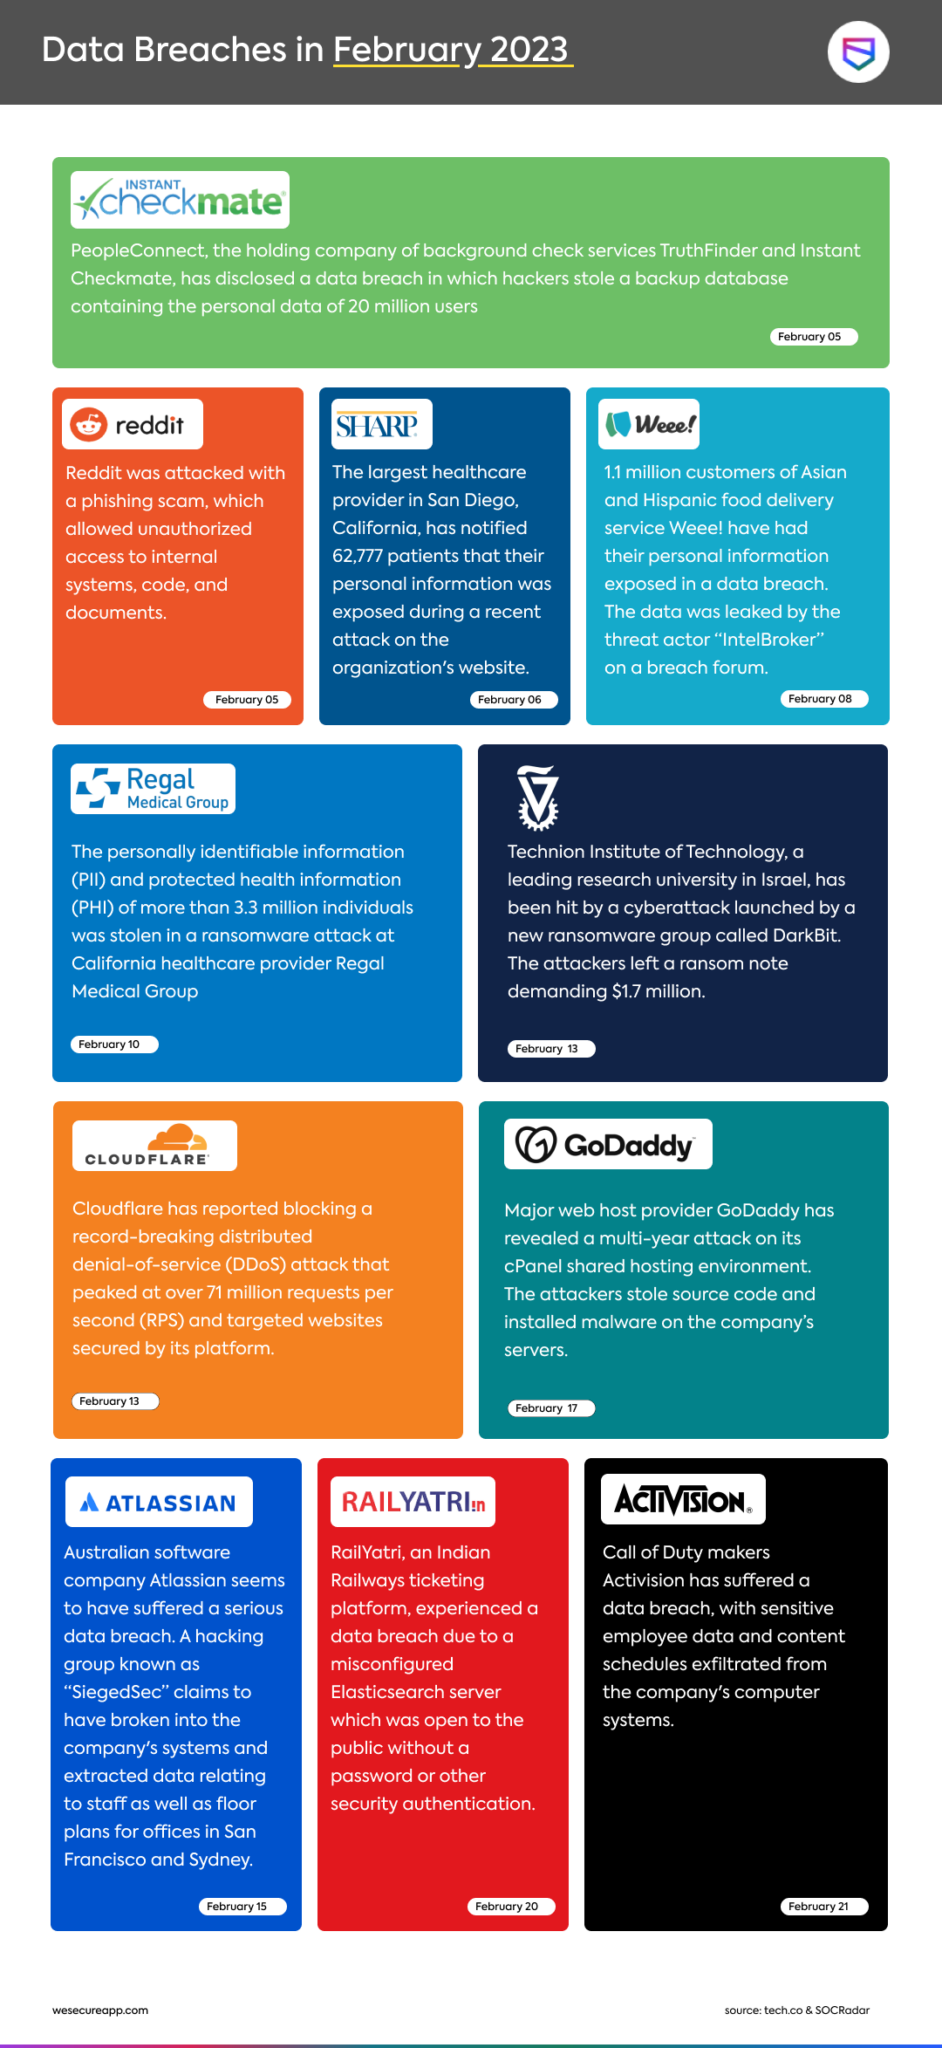 Data Breaches in February 2023 Infographic Security Boulevard